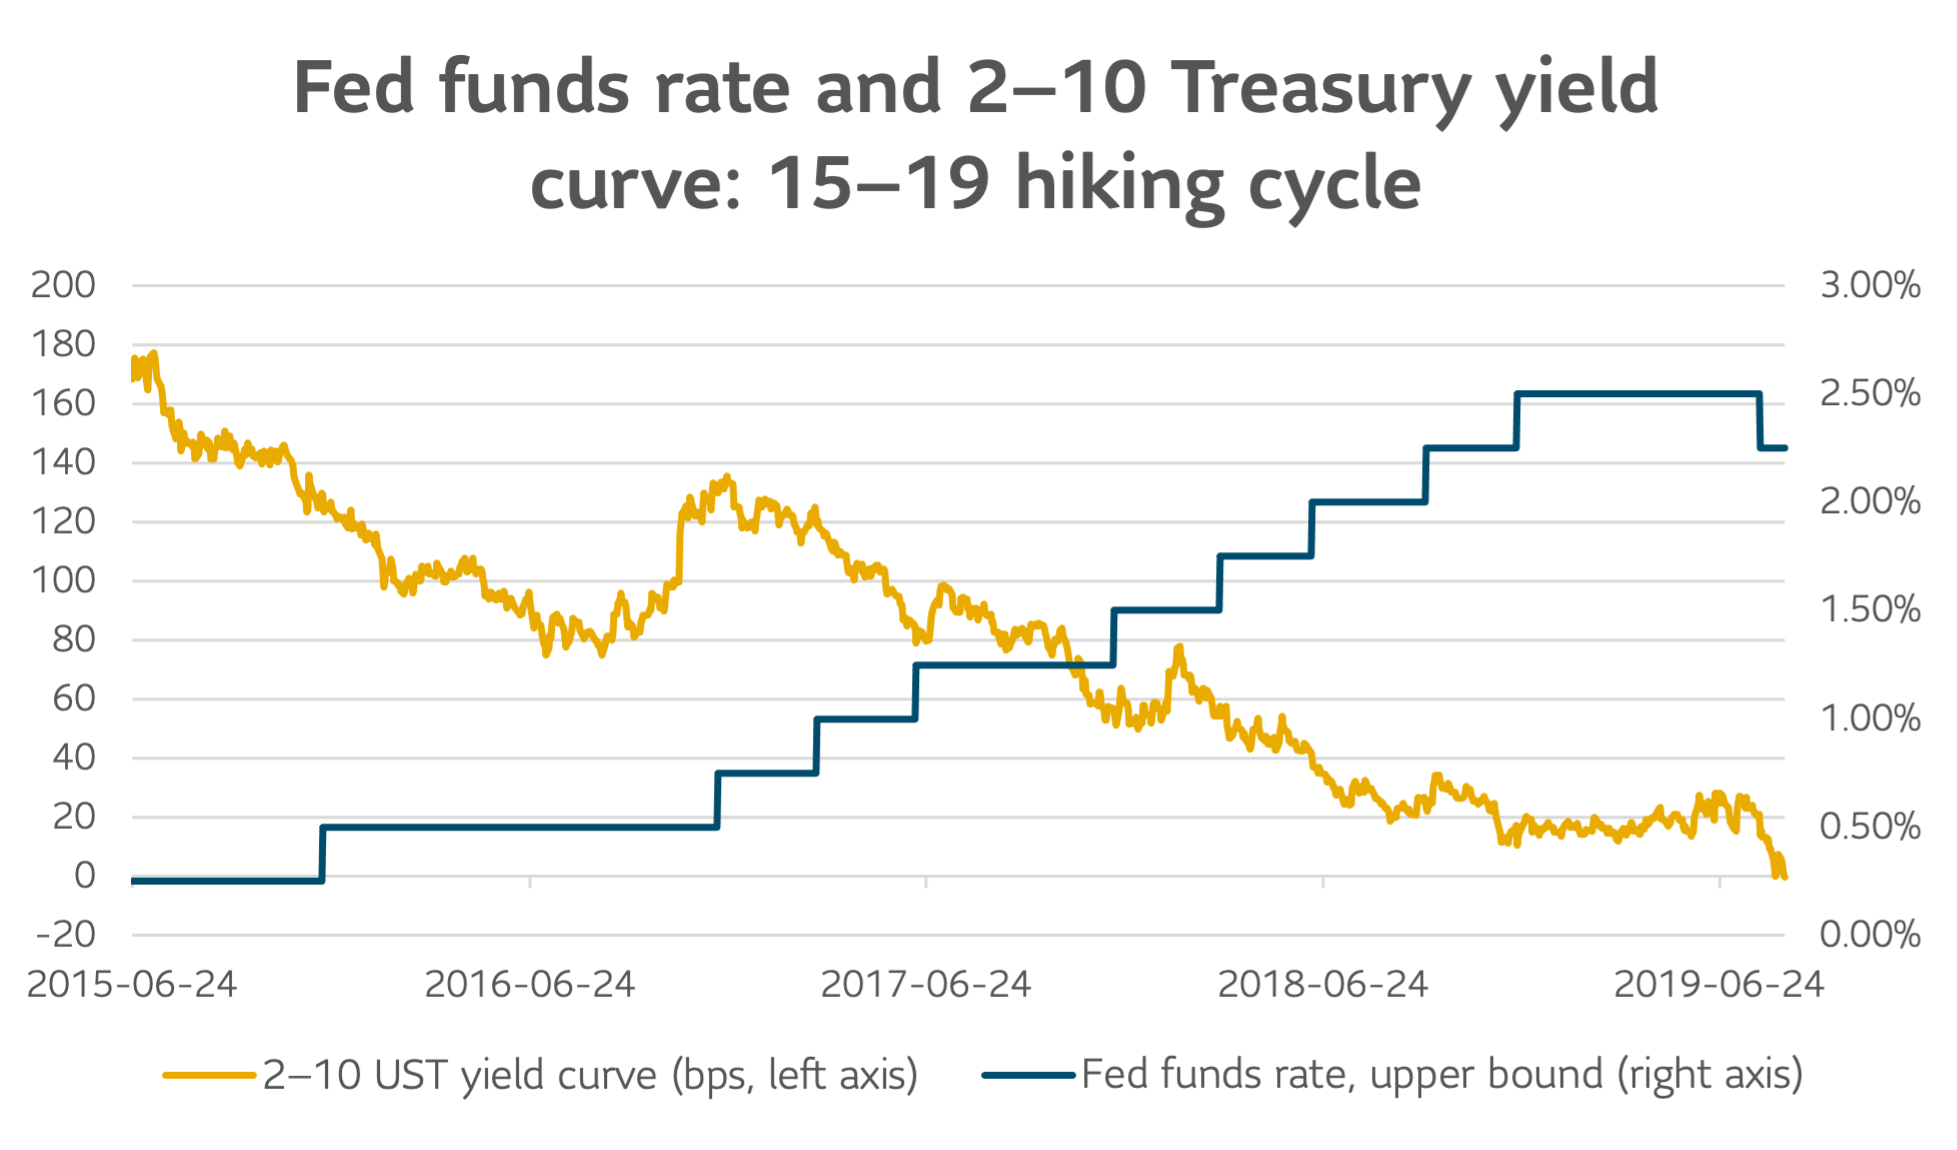 Fed funds rate and 2-10 Treasury yield curve: 15-19 hiking cycle